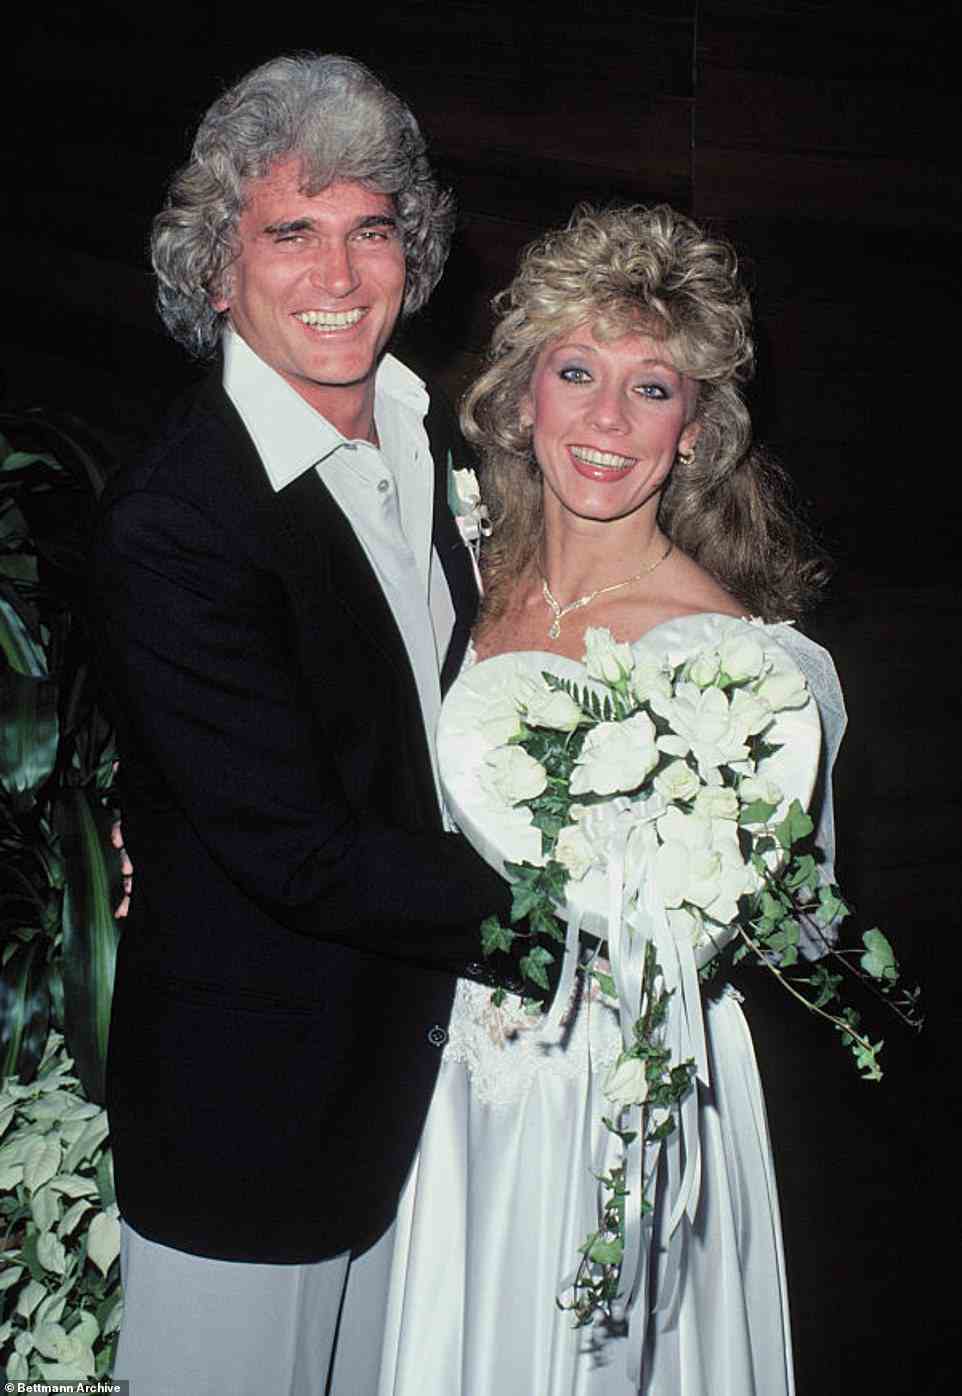 He and Noe split in 1982. After that, he tied the knot with Little House on the Prairie makeup artist Cindy Clerico (pictured at their wedding) in 1983. Their relationship caused media backlash since it started while he was still married to Noe